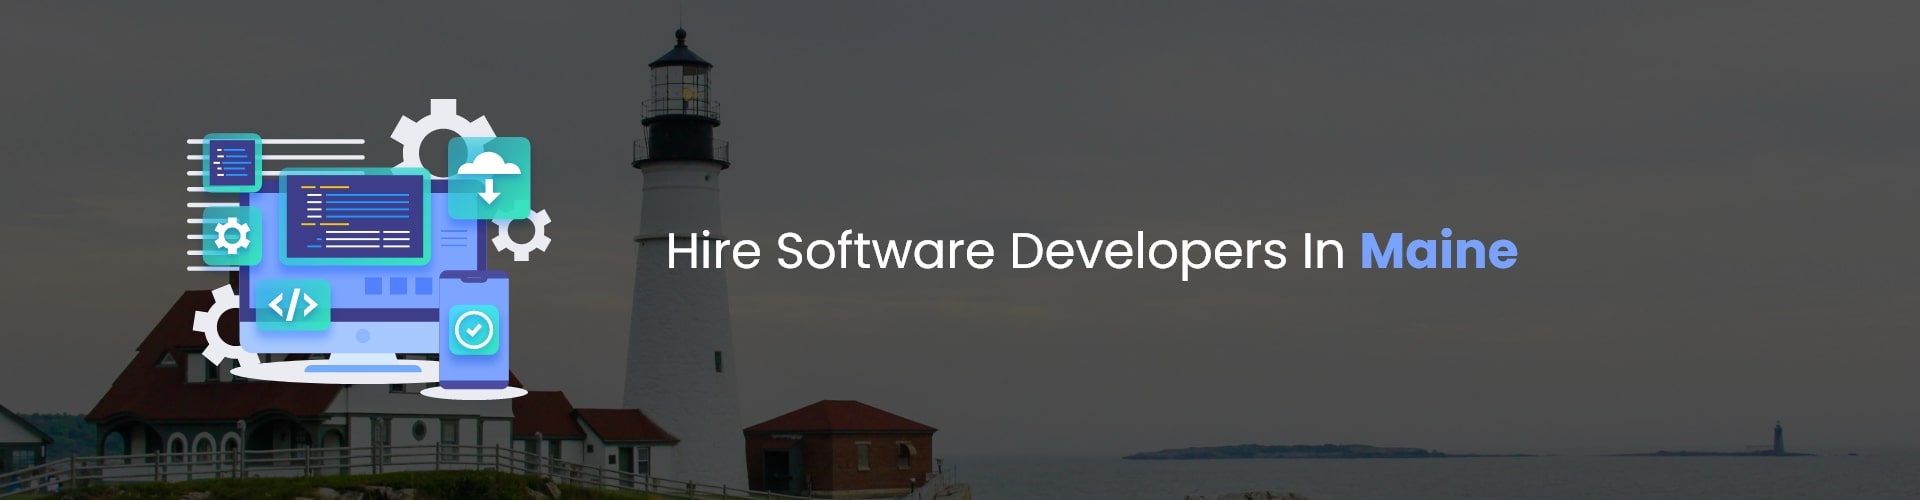 hire software developers in maine